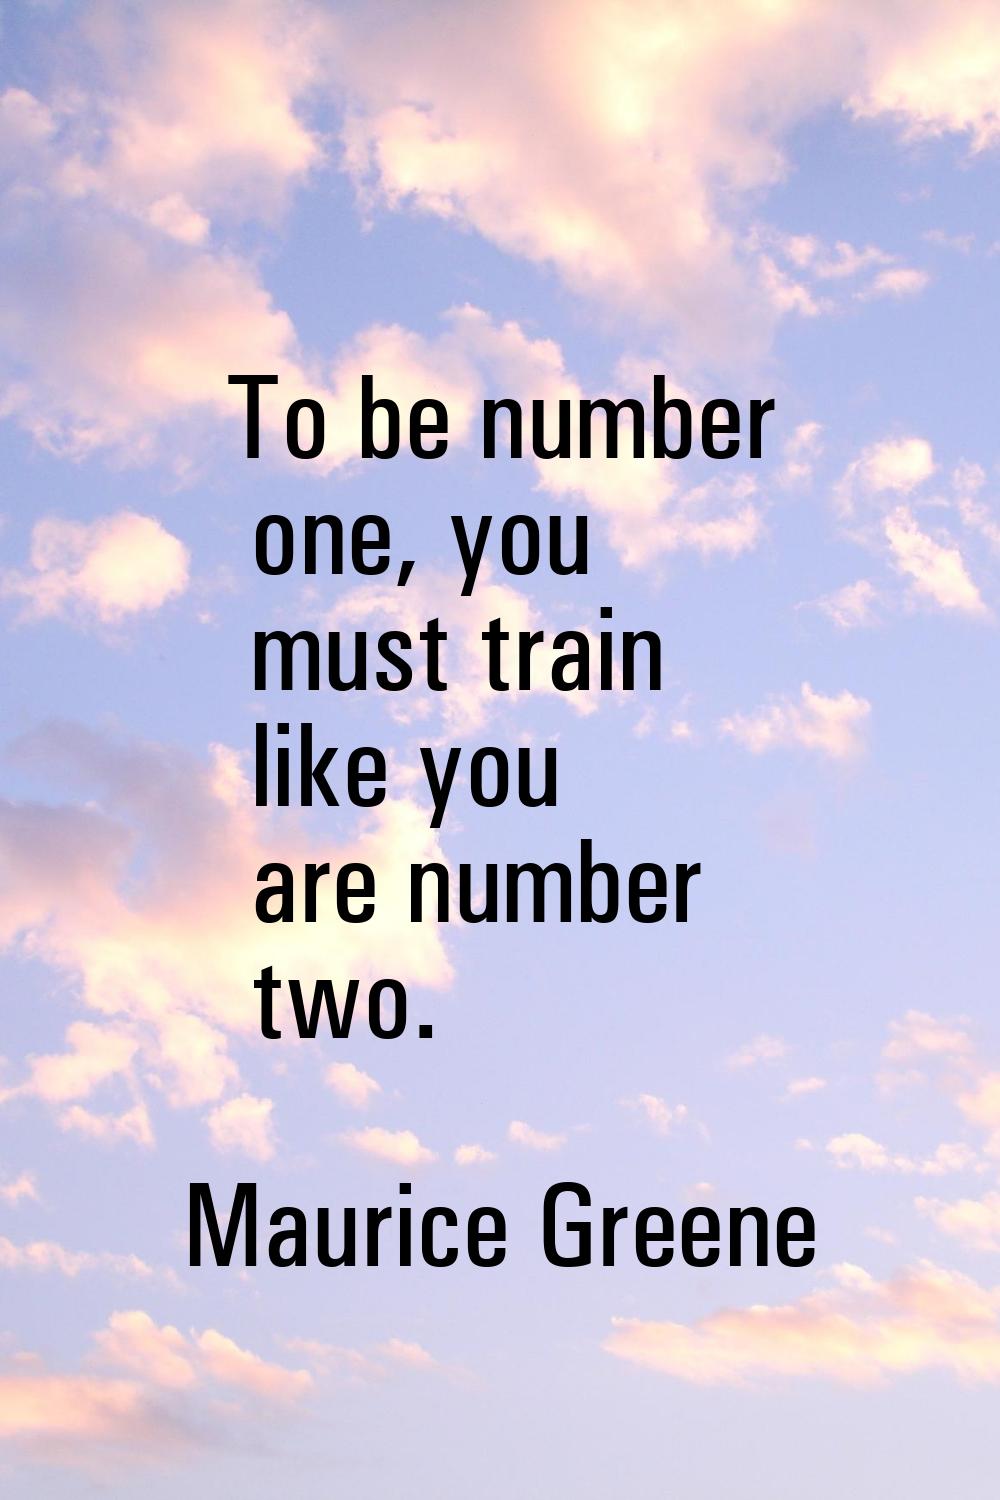 To be number one, you must train like you are number two.